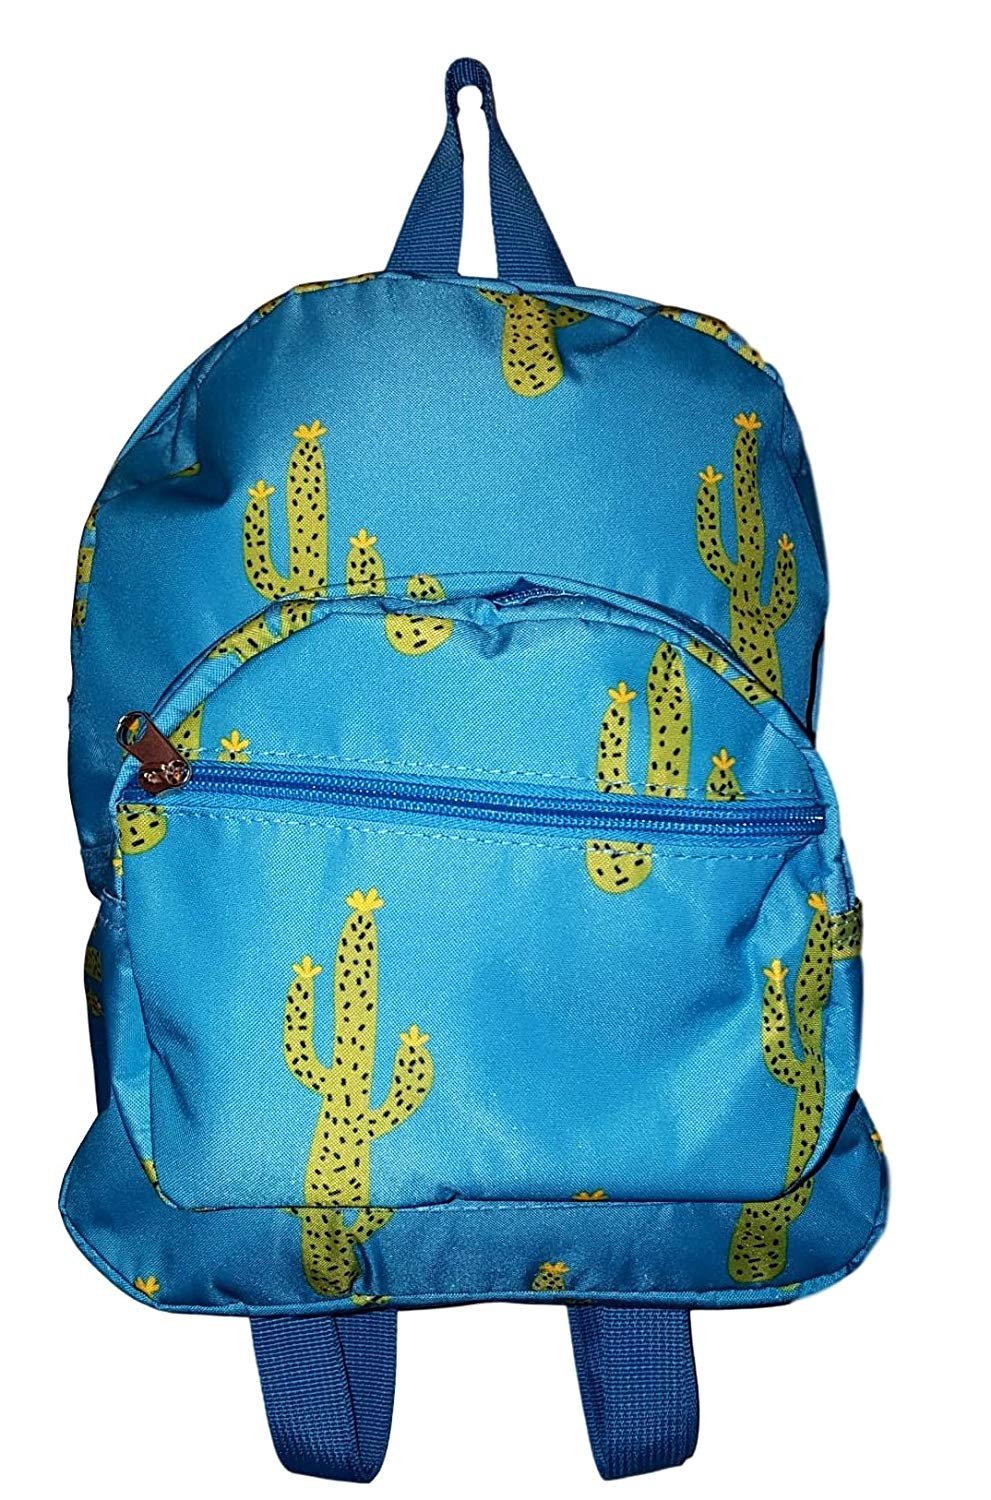 11-inch Mini Backpack Purse, Zipper Front Pockets Teen Child Turquoise Cactus Print - image 2 of 3